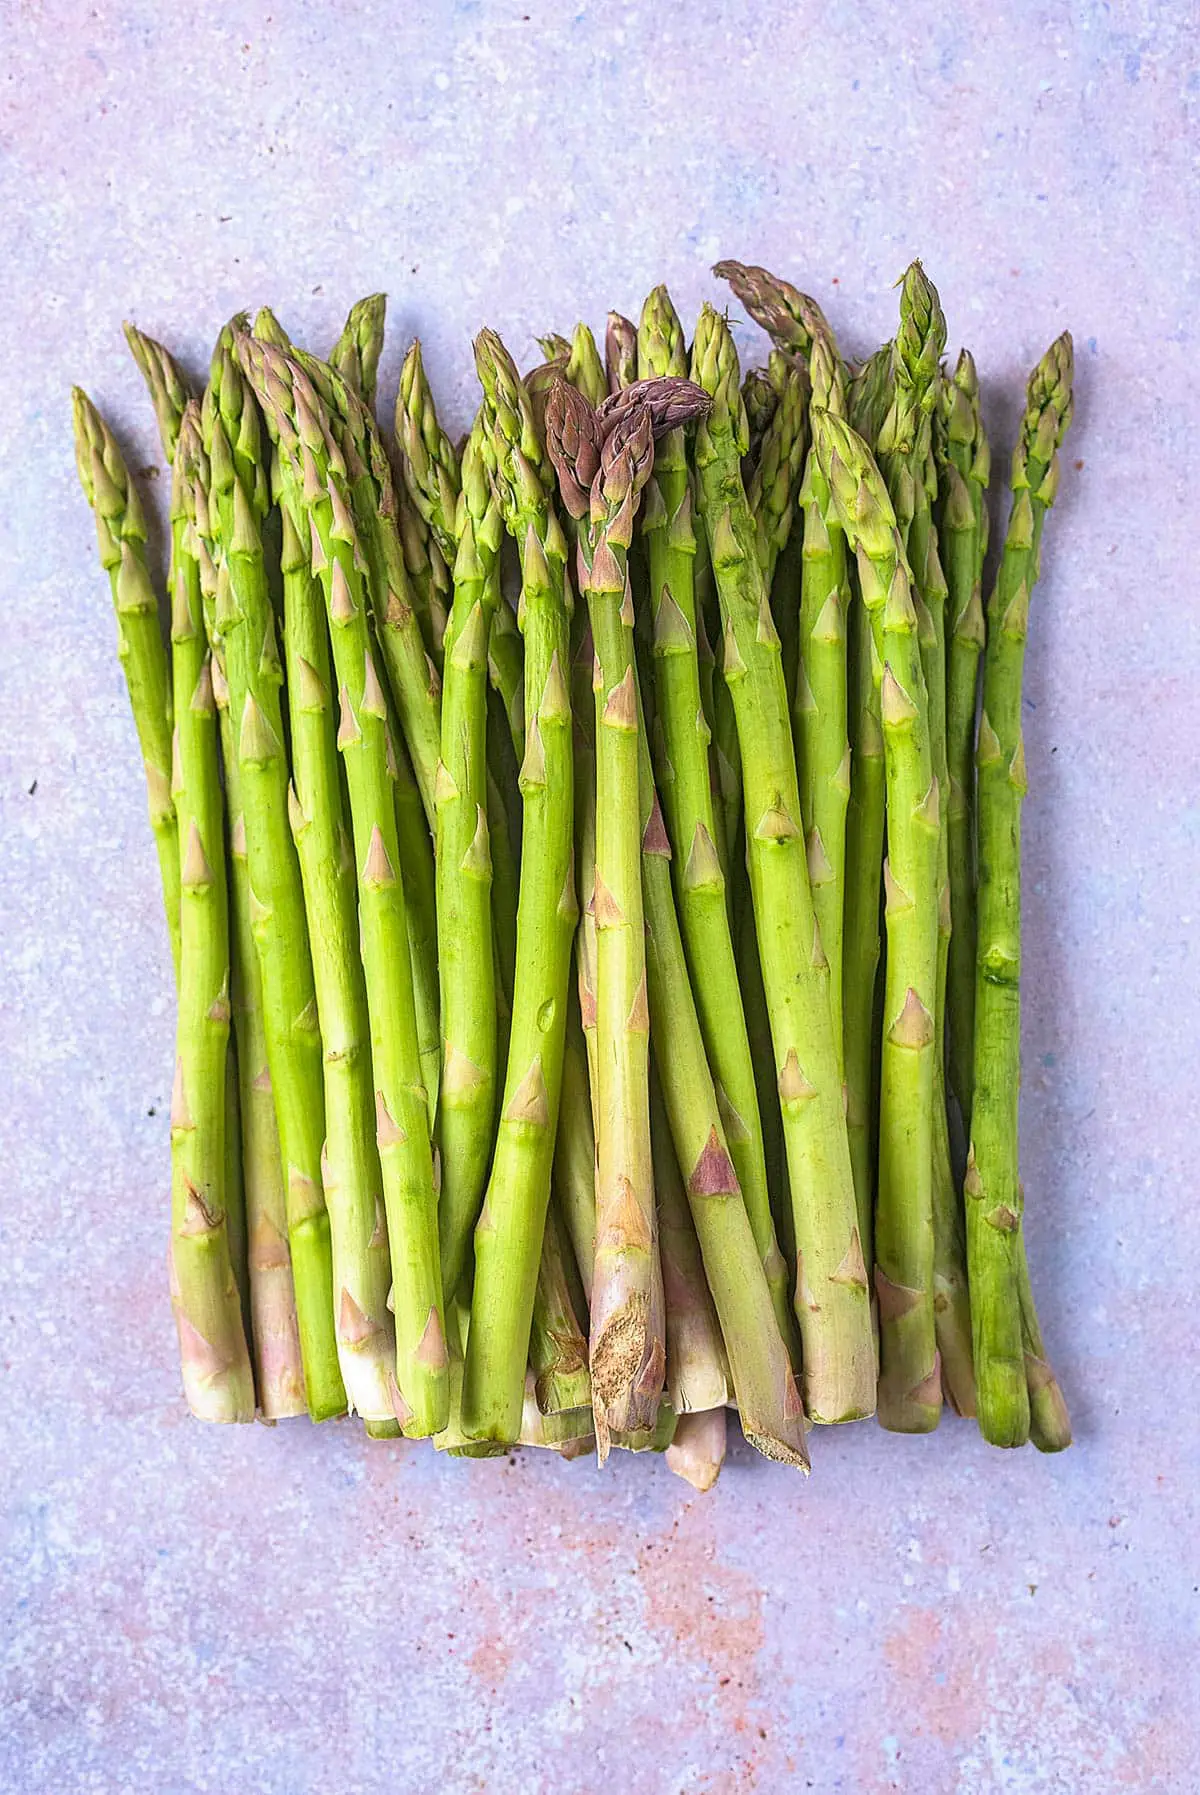 A pile of asparagus spears laid on a stone surface.